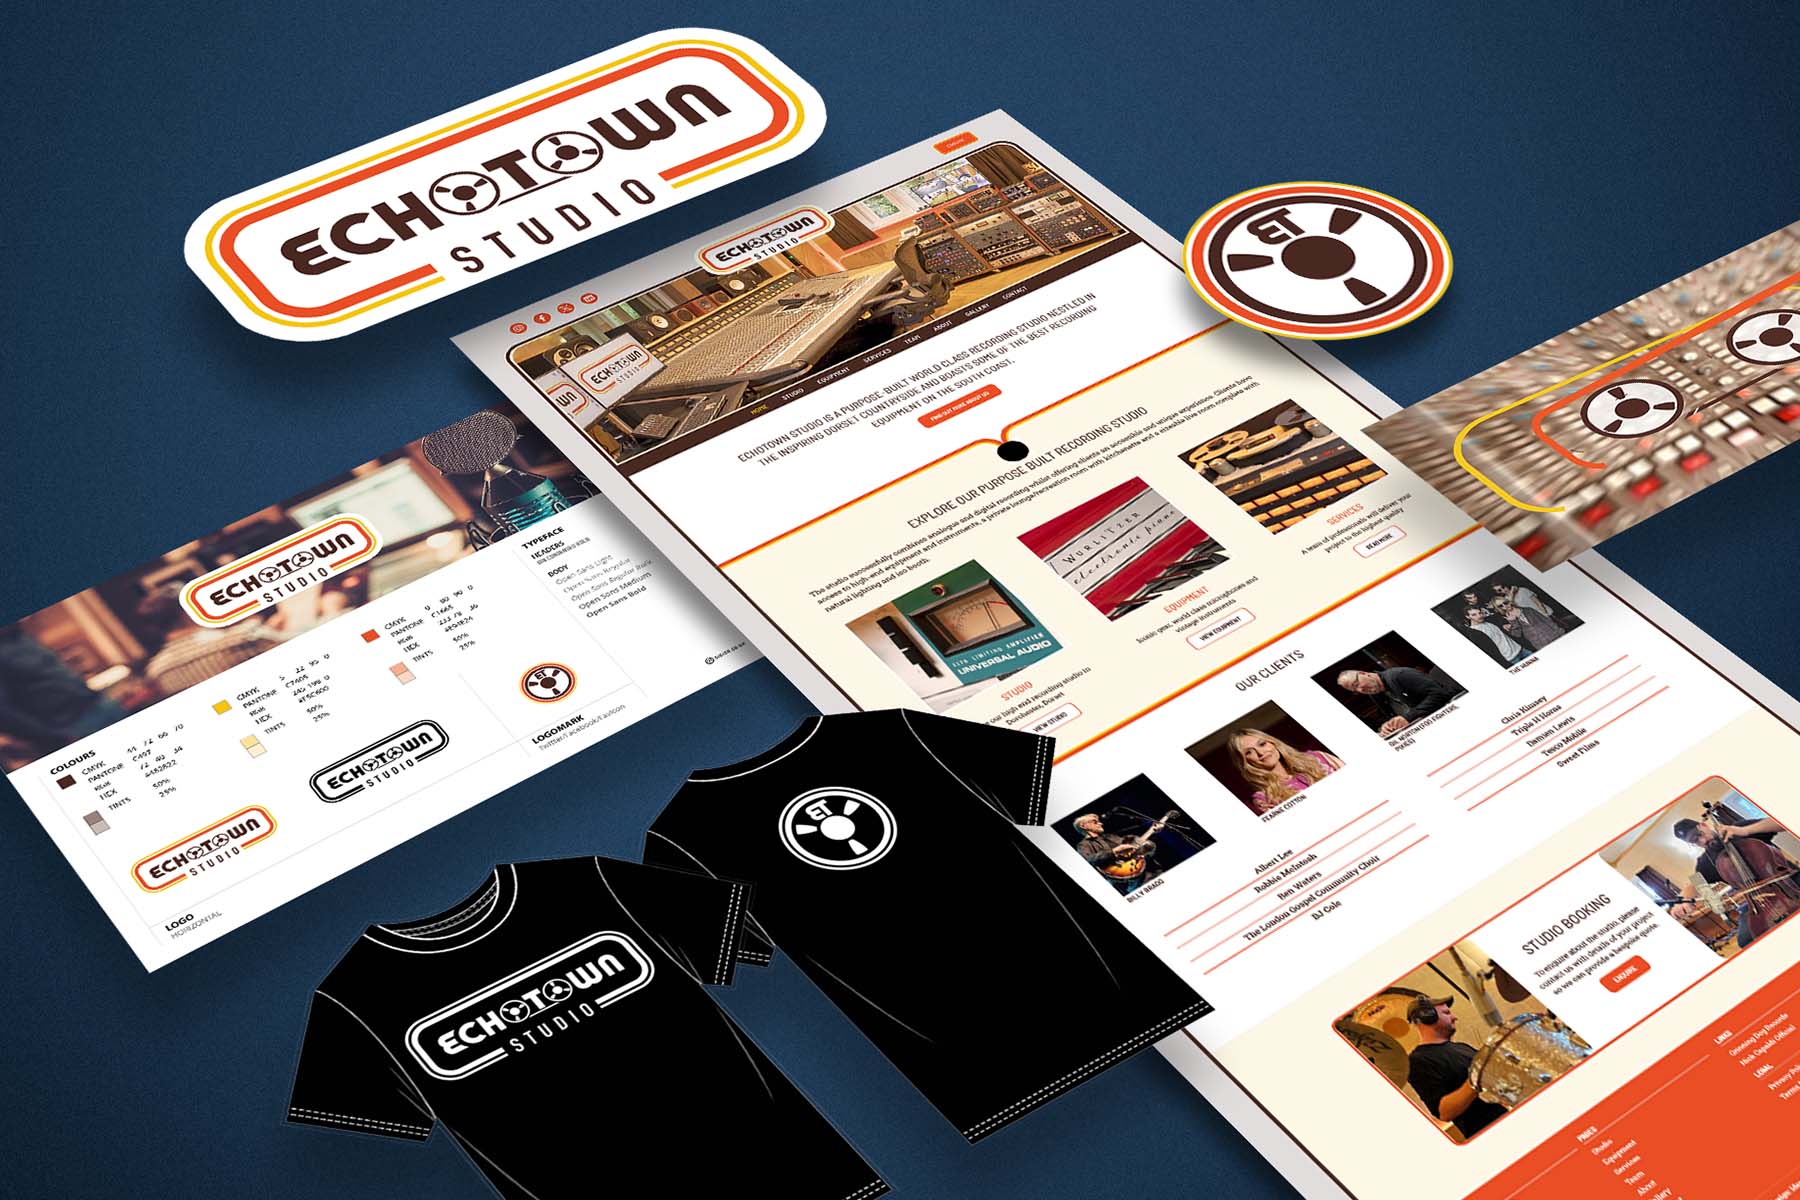 didier.co.uk - Web design, Graphic design and artwork for the music industry - Case study: Echotown Studio